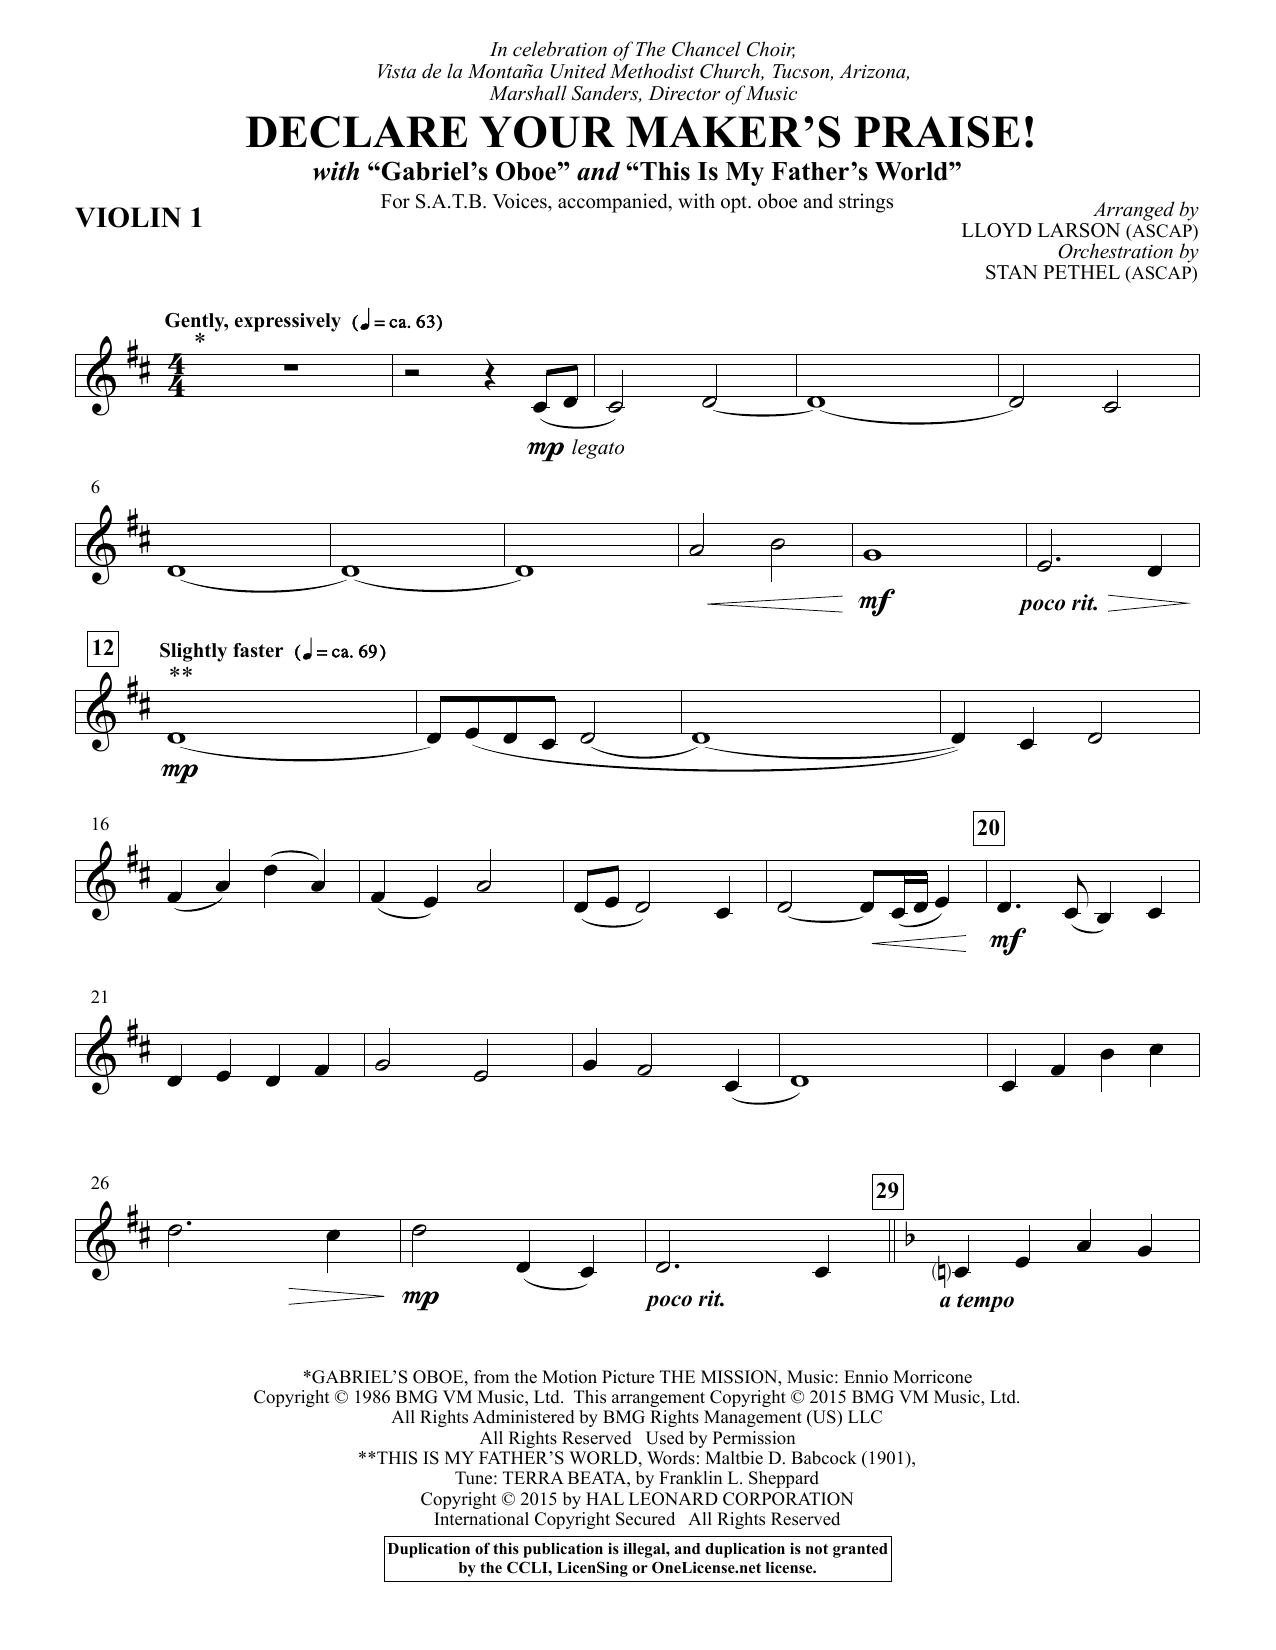 Lloyd Larson Declare Your Maker's Praise! - Violin 1 sheet music notes and chords. Download Printable PDF.